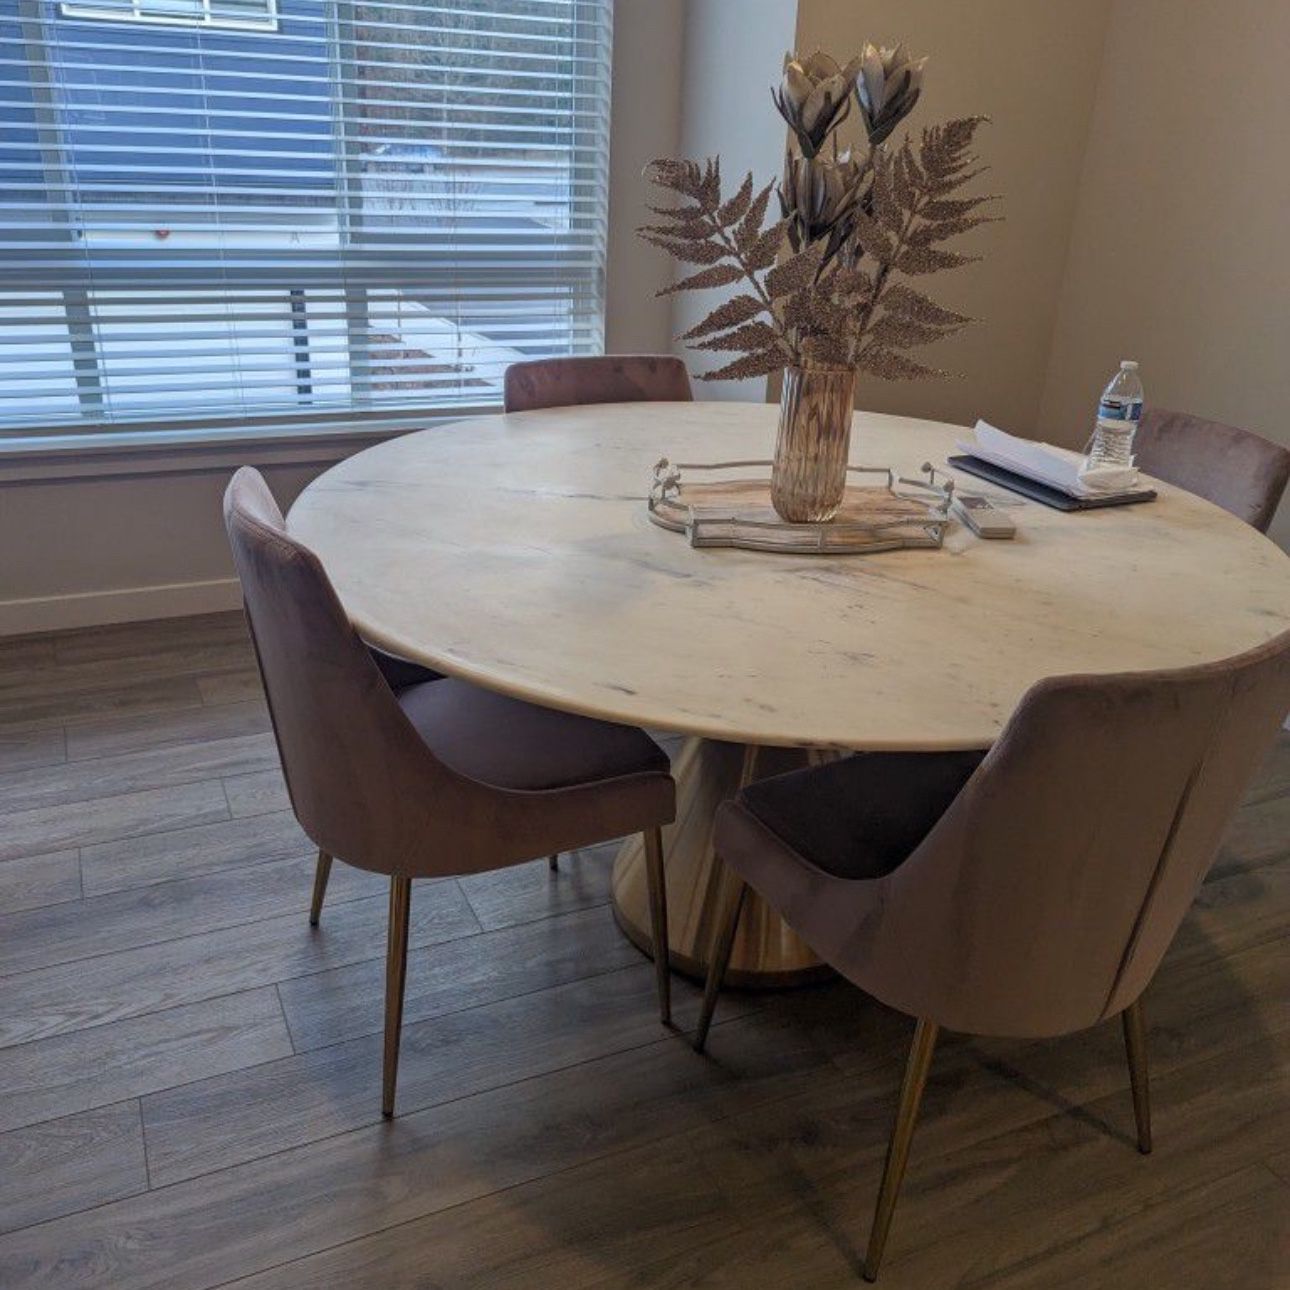 Marble Round Dining Table West Elm, Chairs Included